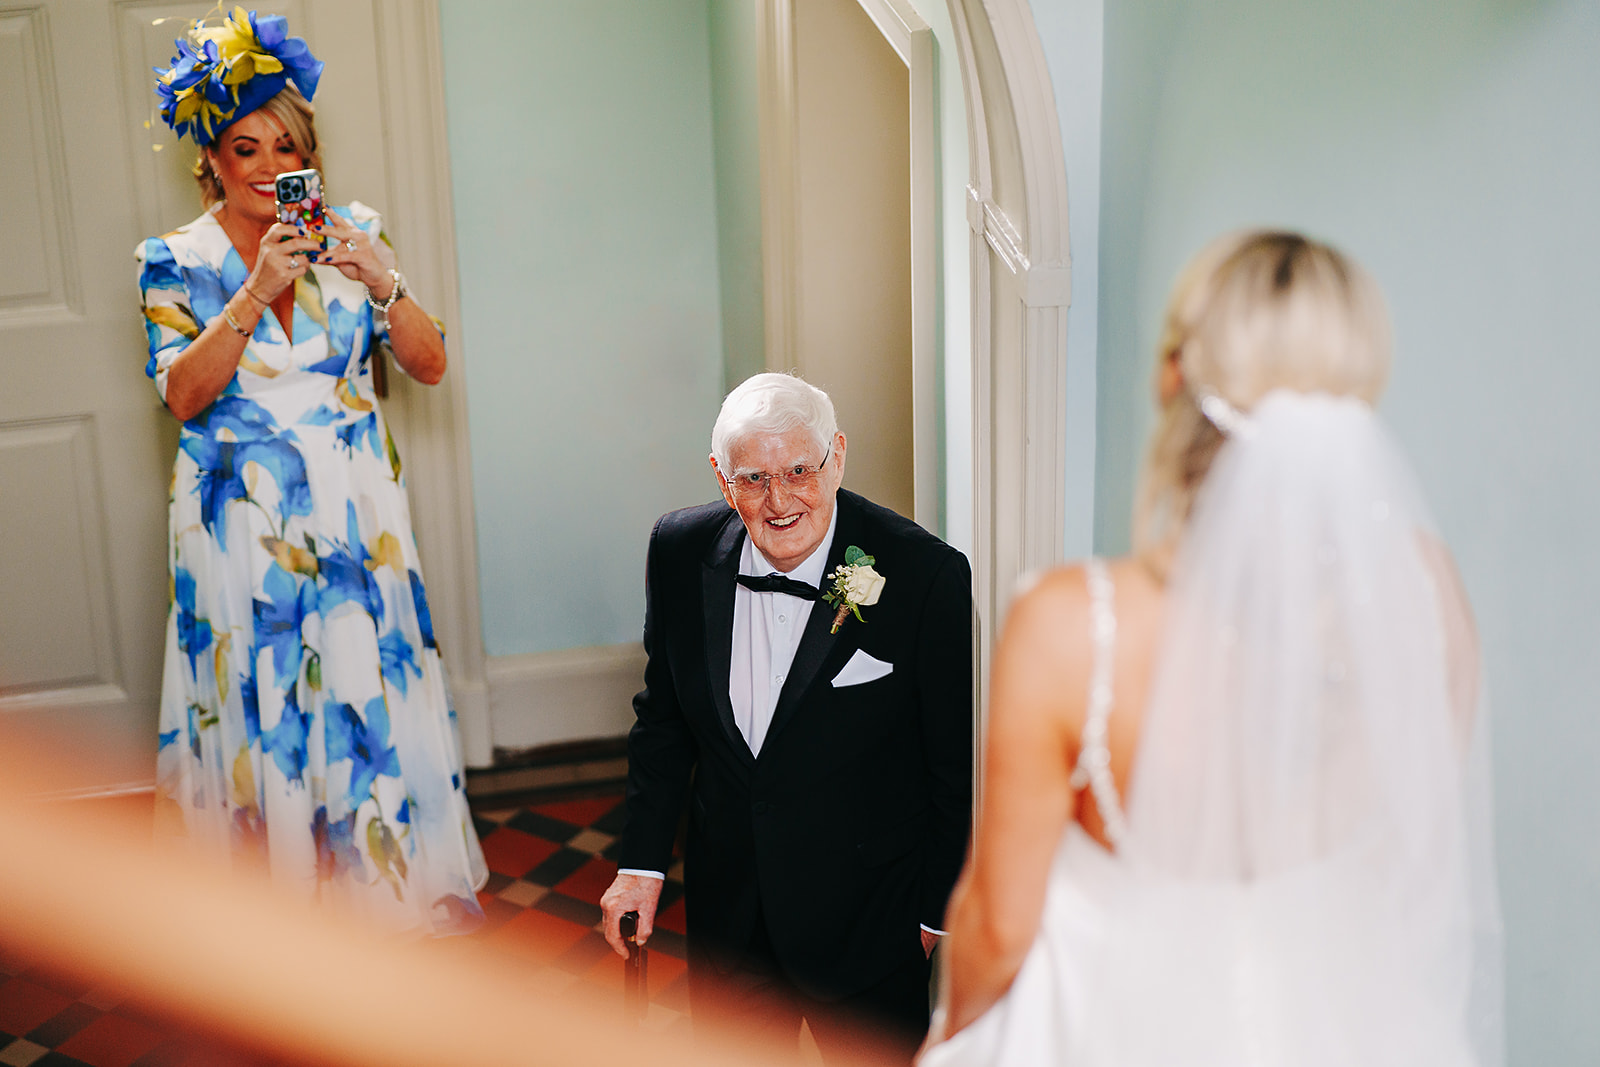 Real moment on wedding day, grandfather sees bride at hornington manor 